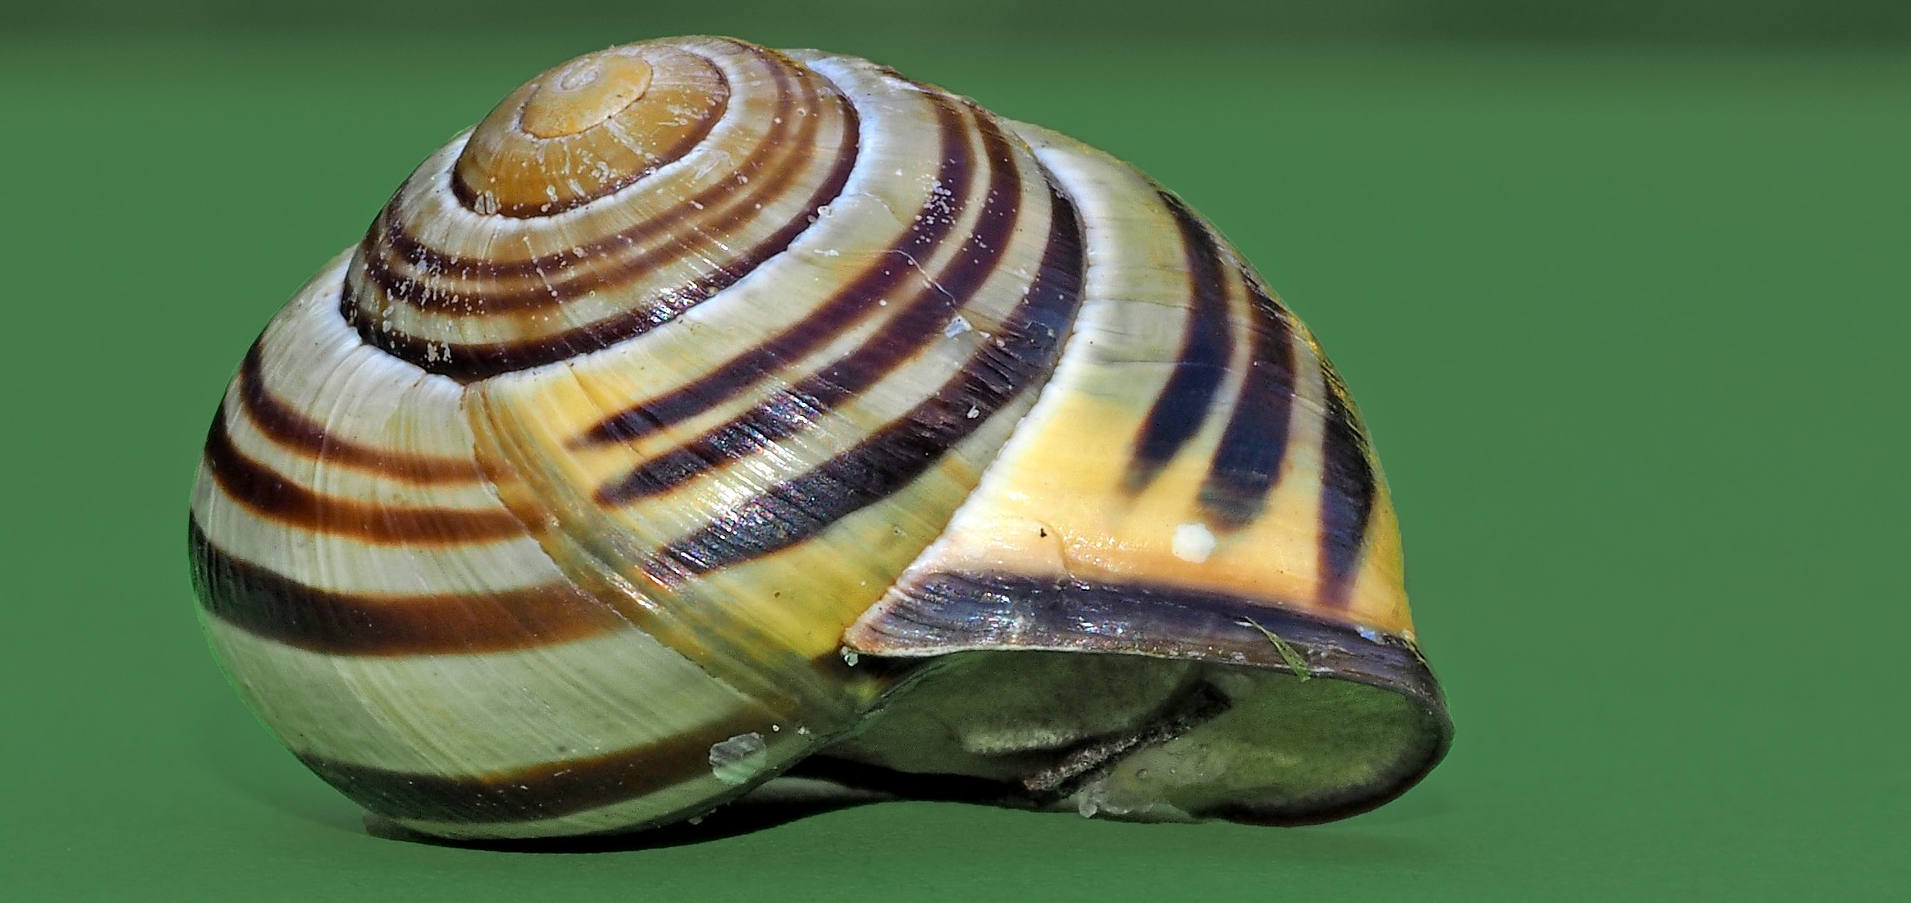 A close up image of a snail shell.